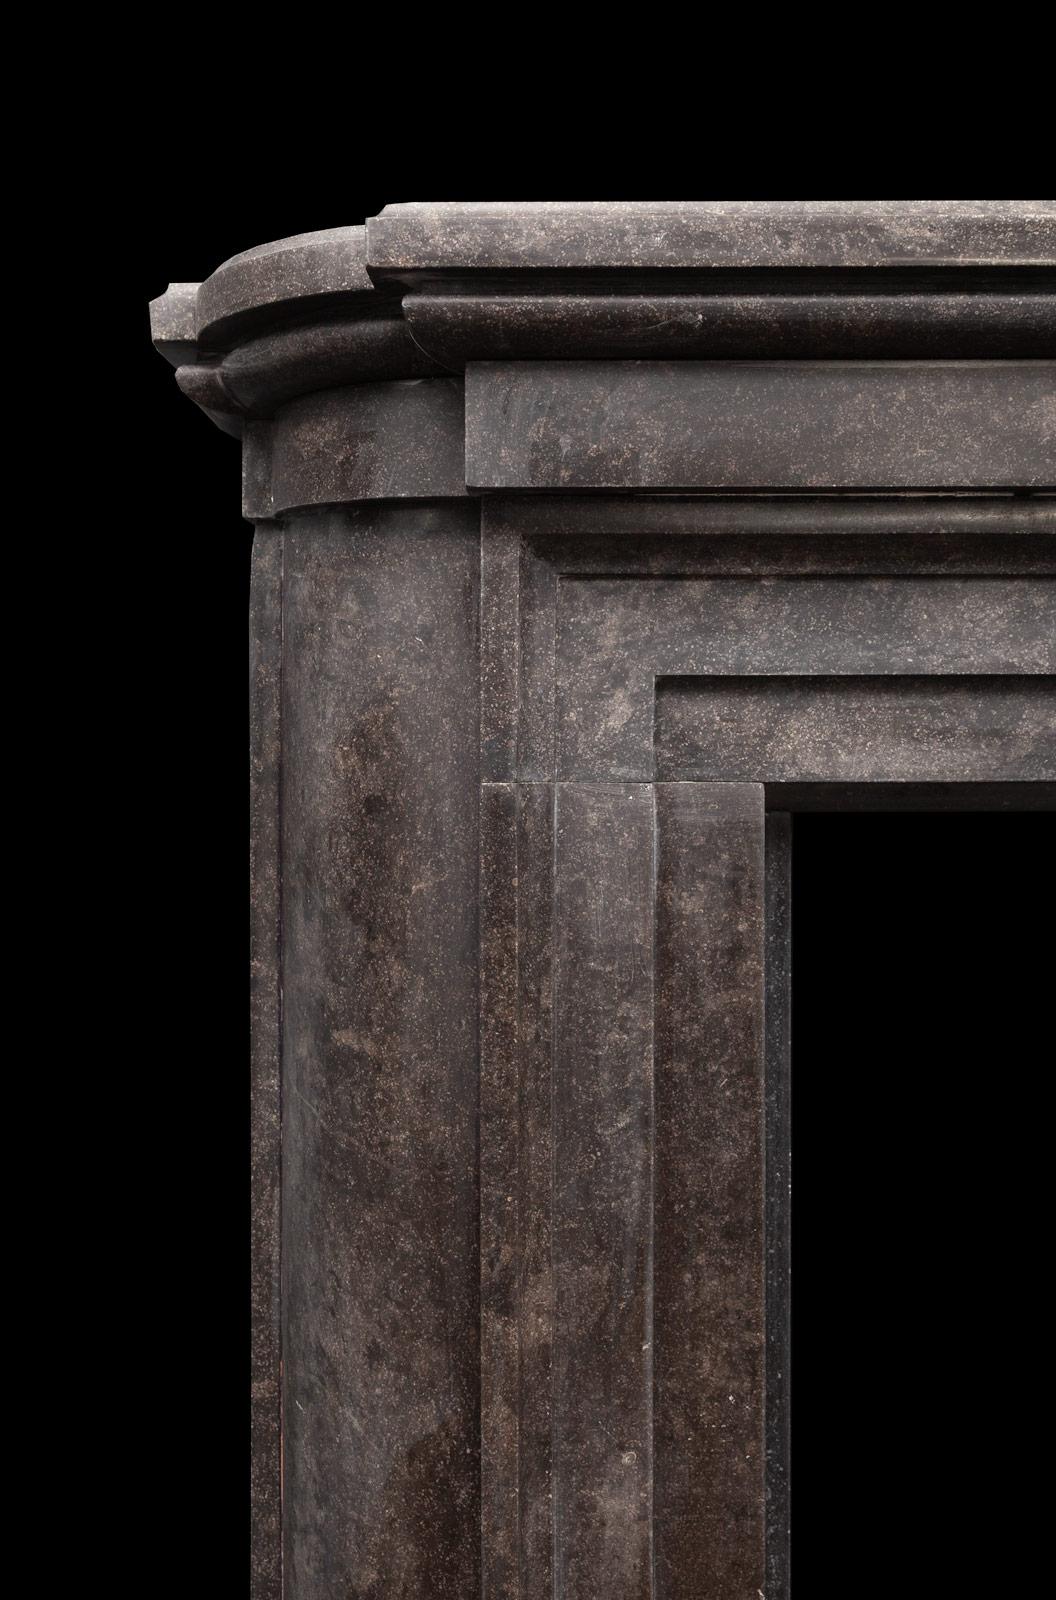 Antique neo-Georgian style Kilkenny marble fireplace surround. Designed by Frank Atkinson in 1908 for his residence ‘Redcot House’. This neo-Georgian style fireplace made from polished Kilkenny limestone featuring simple lines, moldings and contours